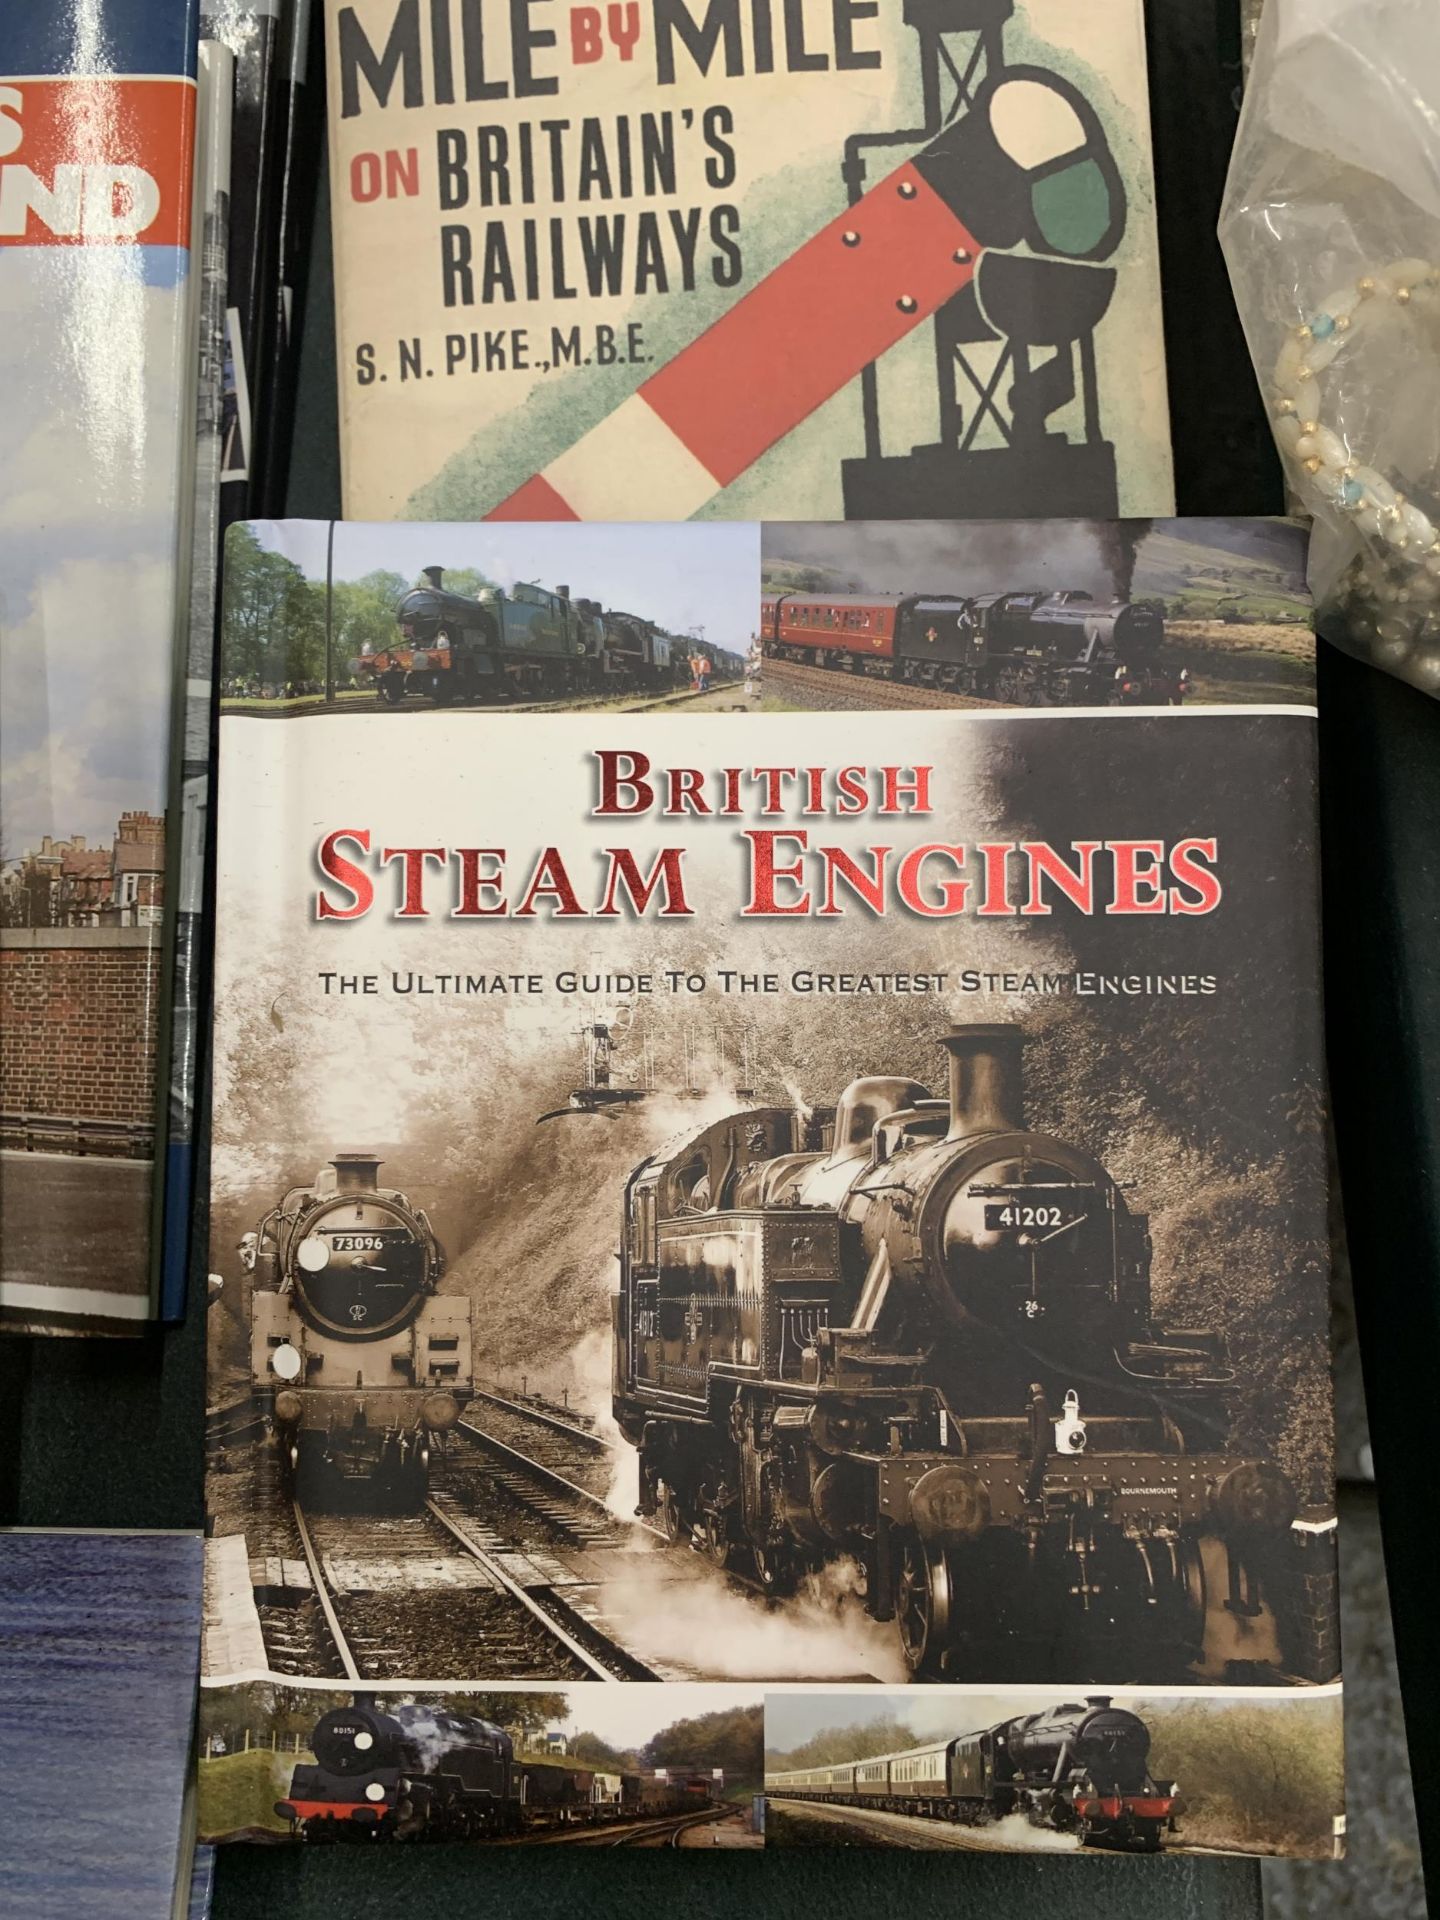 A COLLECTION OF RAILWAY AND LOCOMOTIVE RELATED TRAIN BOOKS - Image 4 of 4